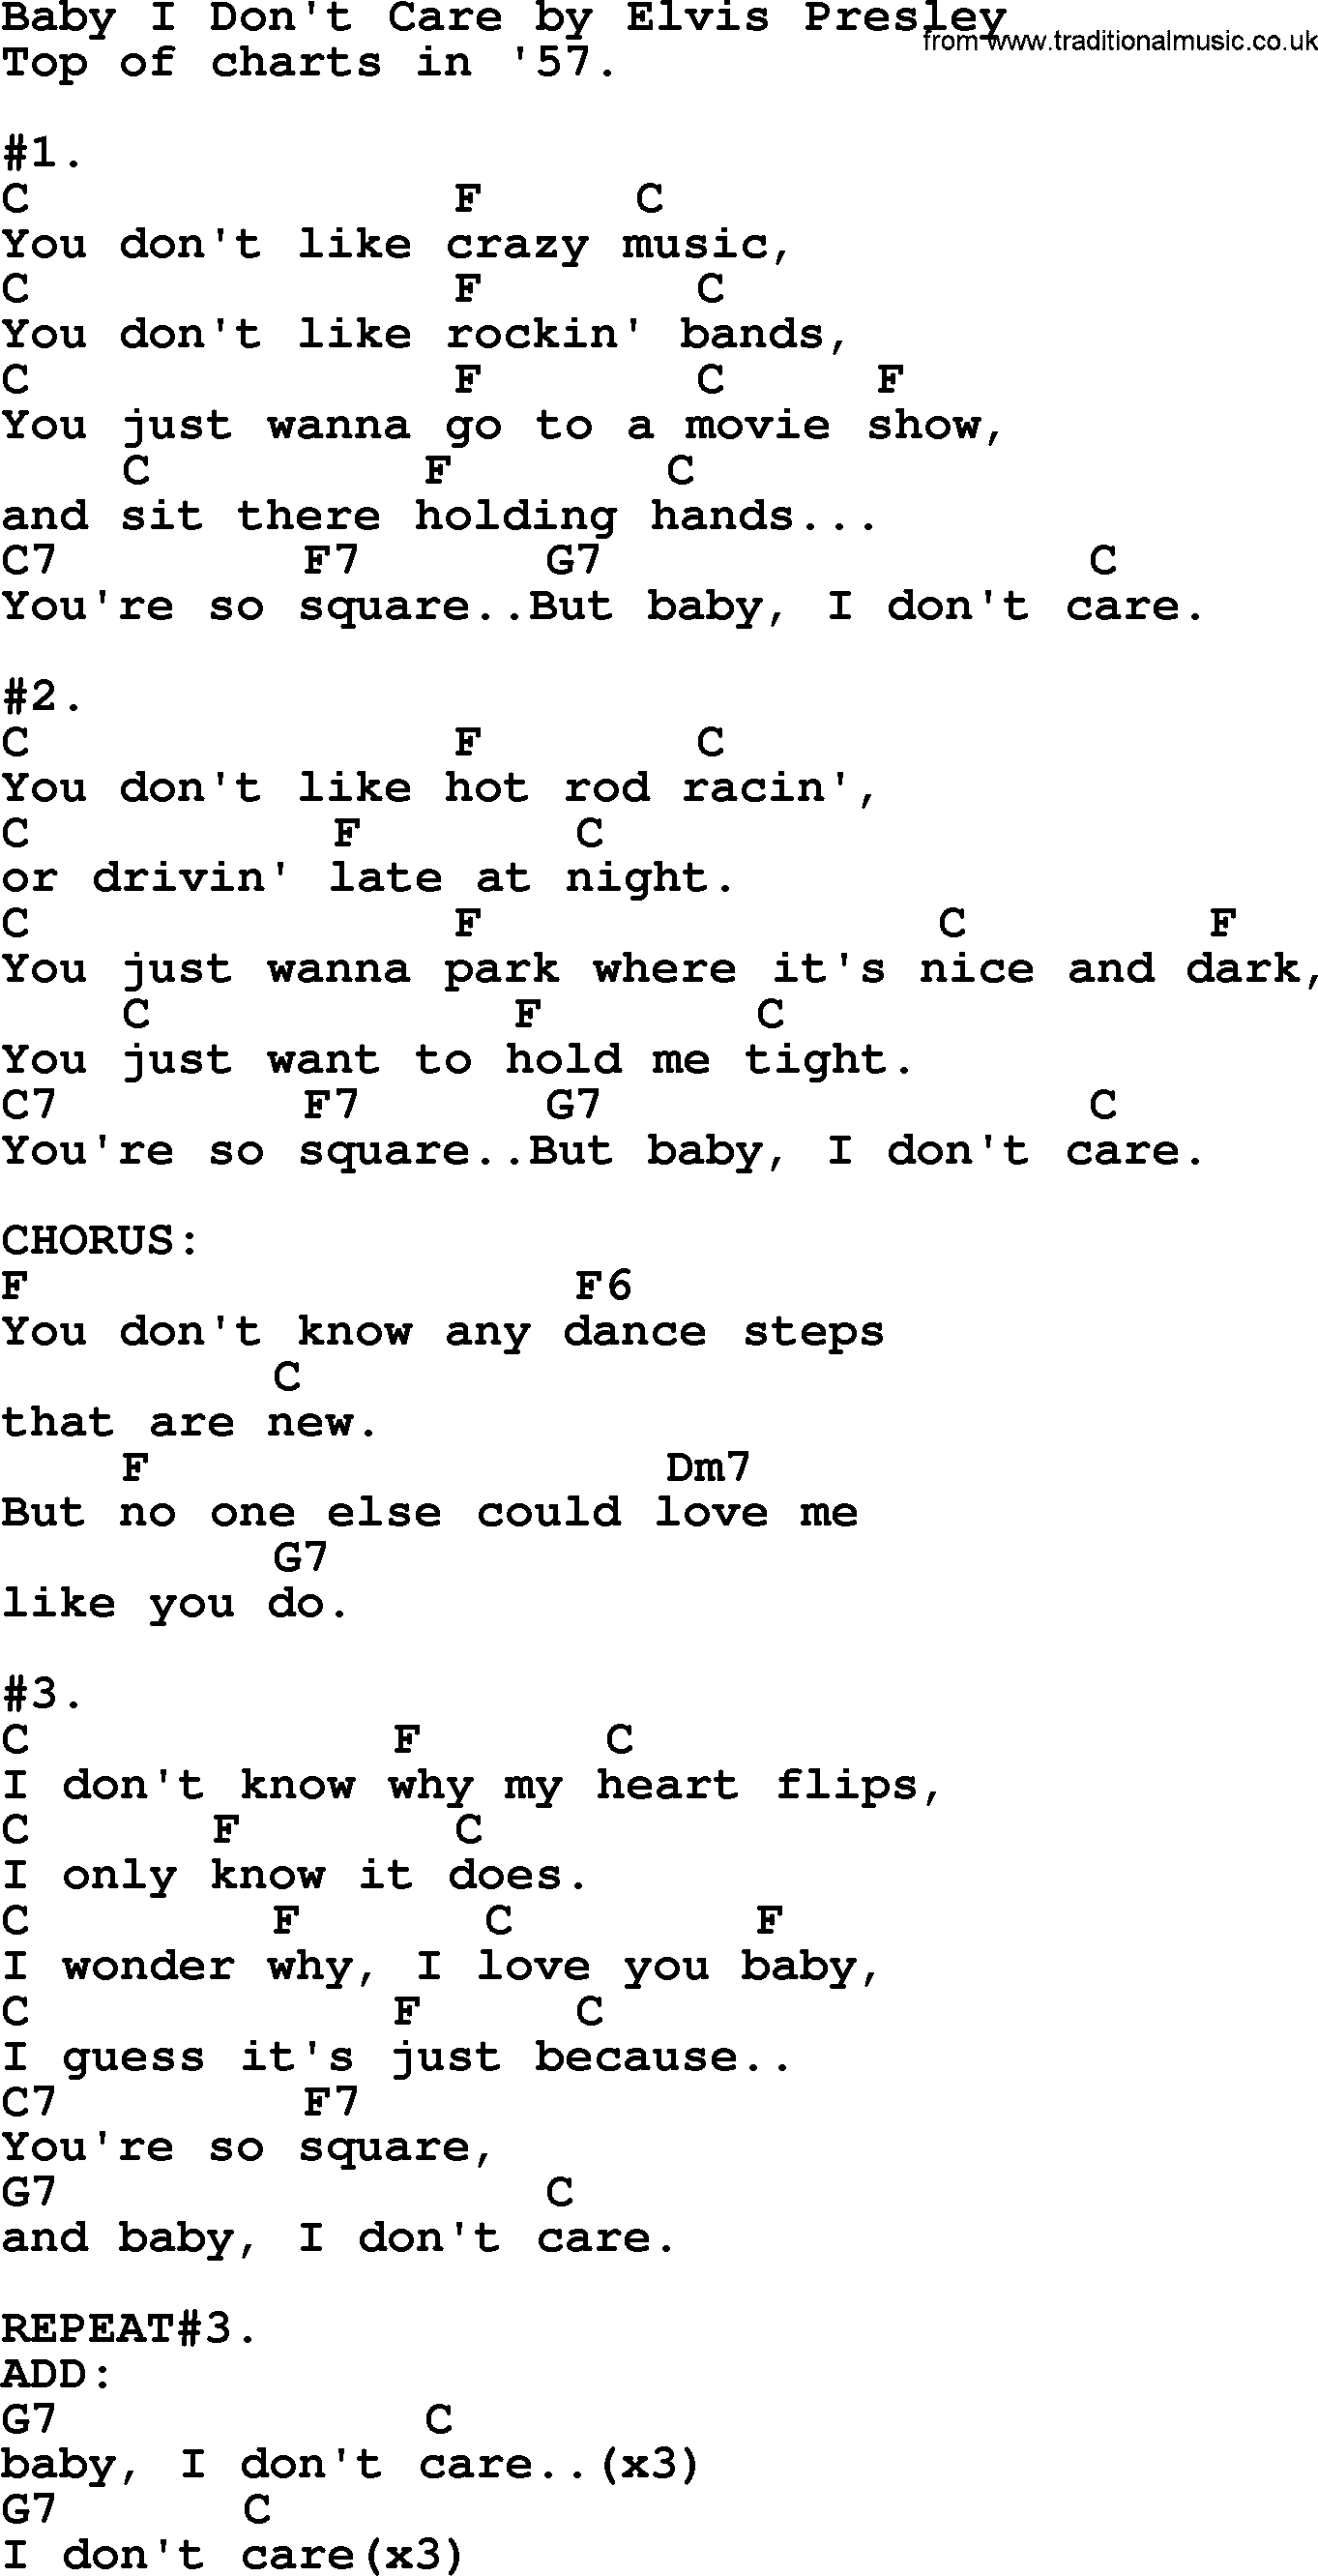 Elvis Presley song: Baby I Don't Care, lyrics and chords